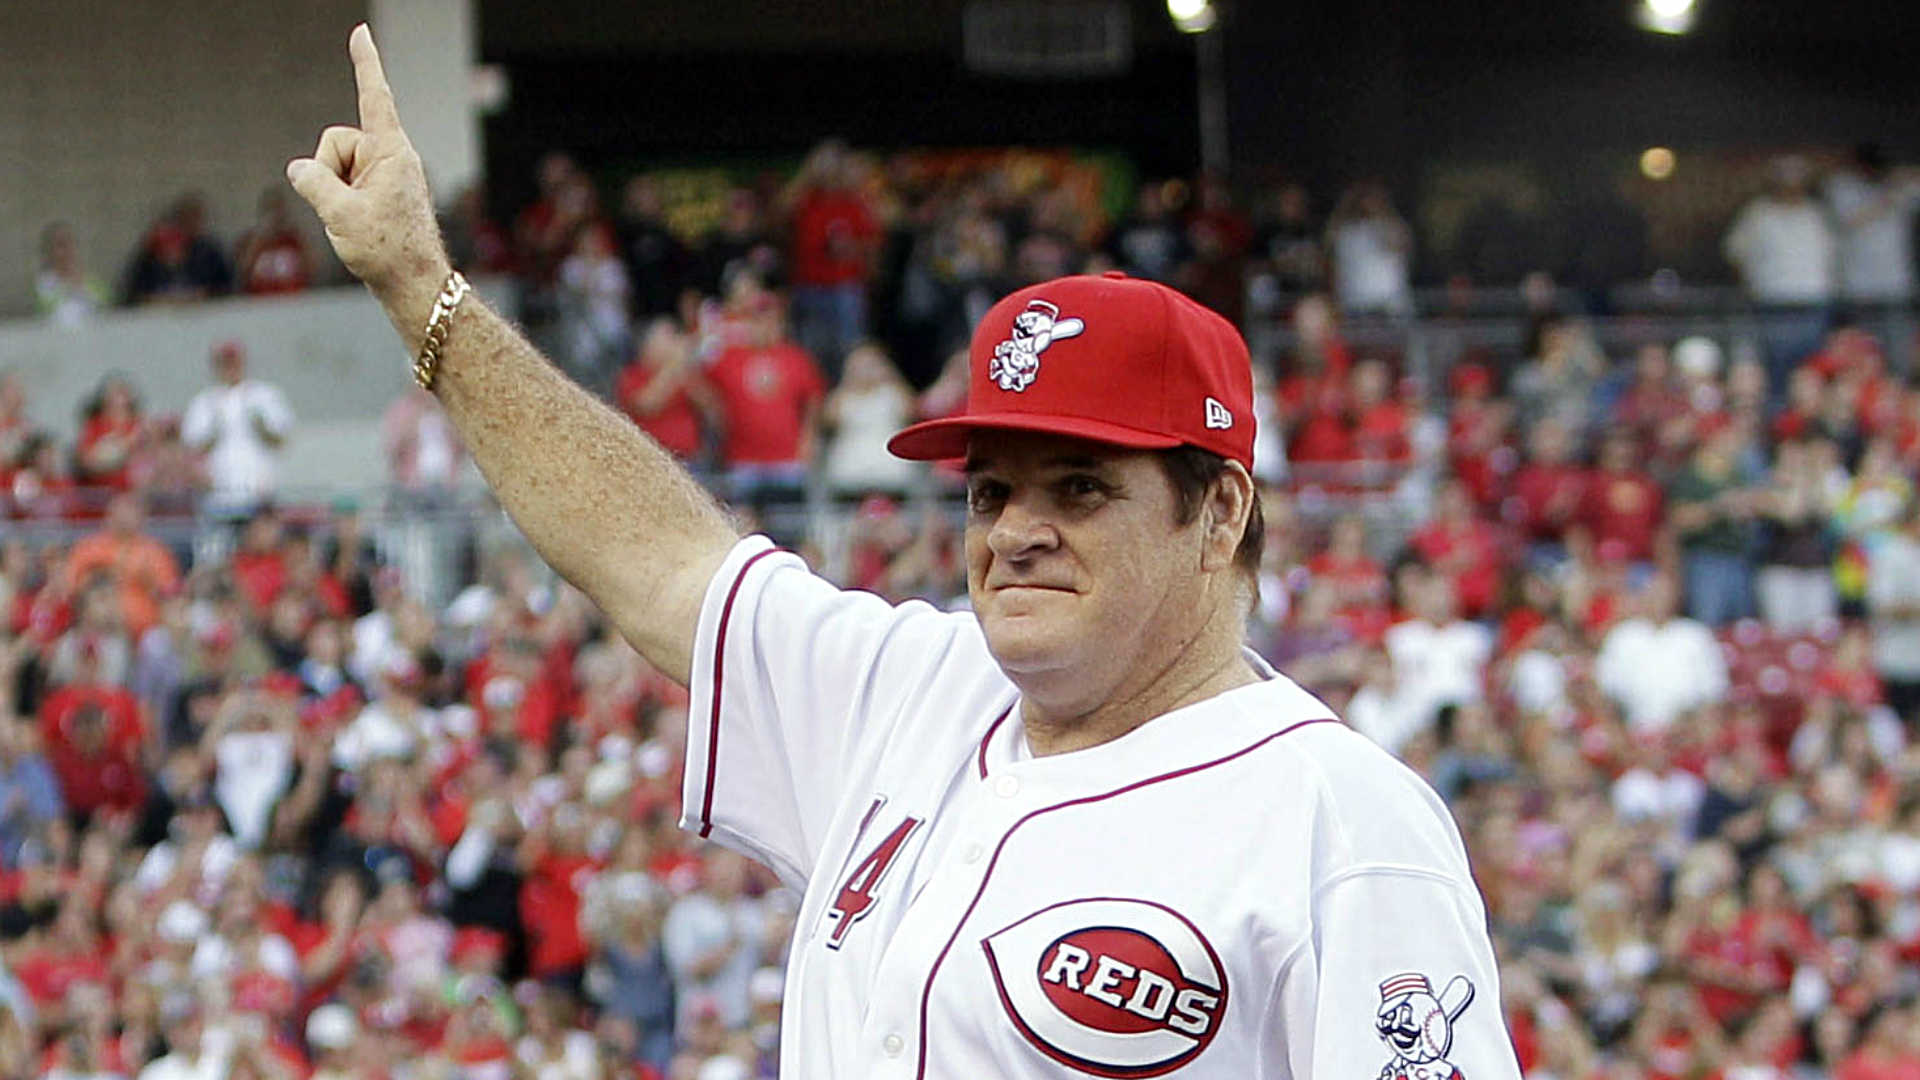 Pete Rose cheered by Reds fans at All-Star Game introduction | MLB | Sporting News1920 x 1080